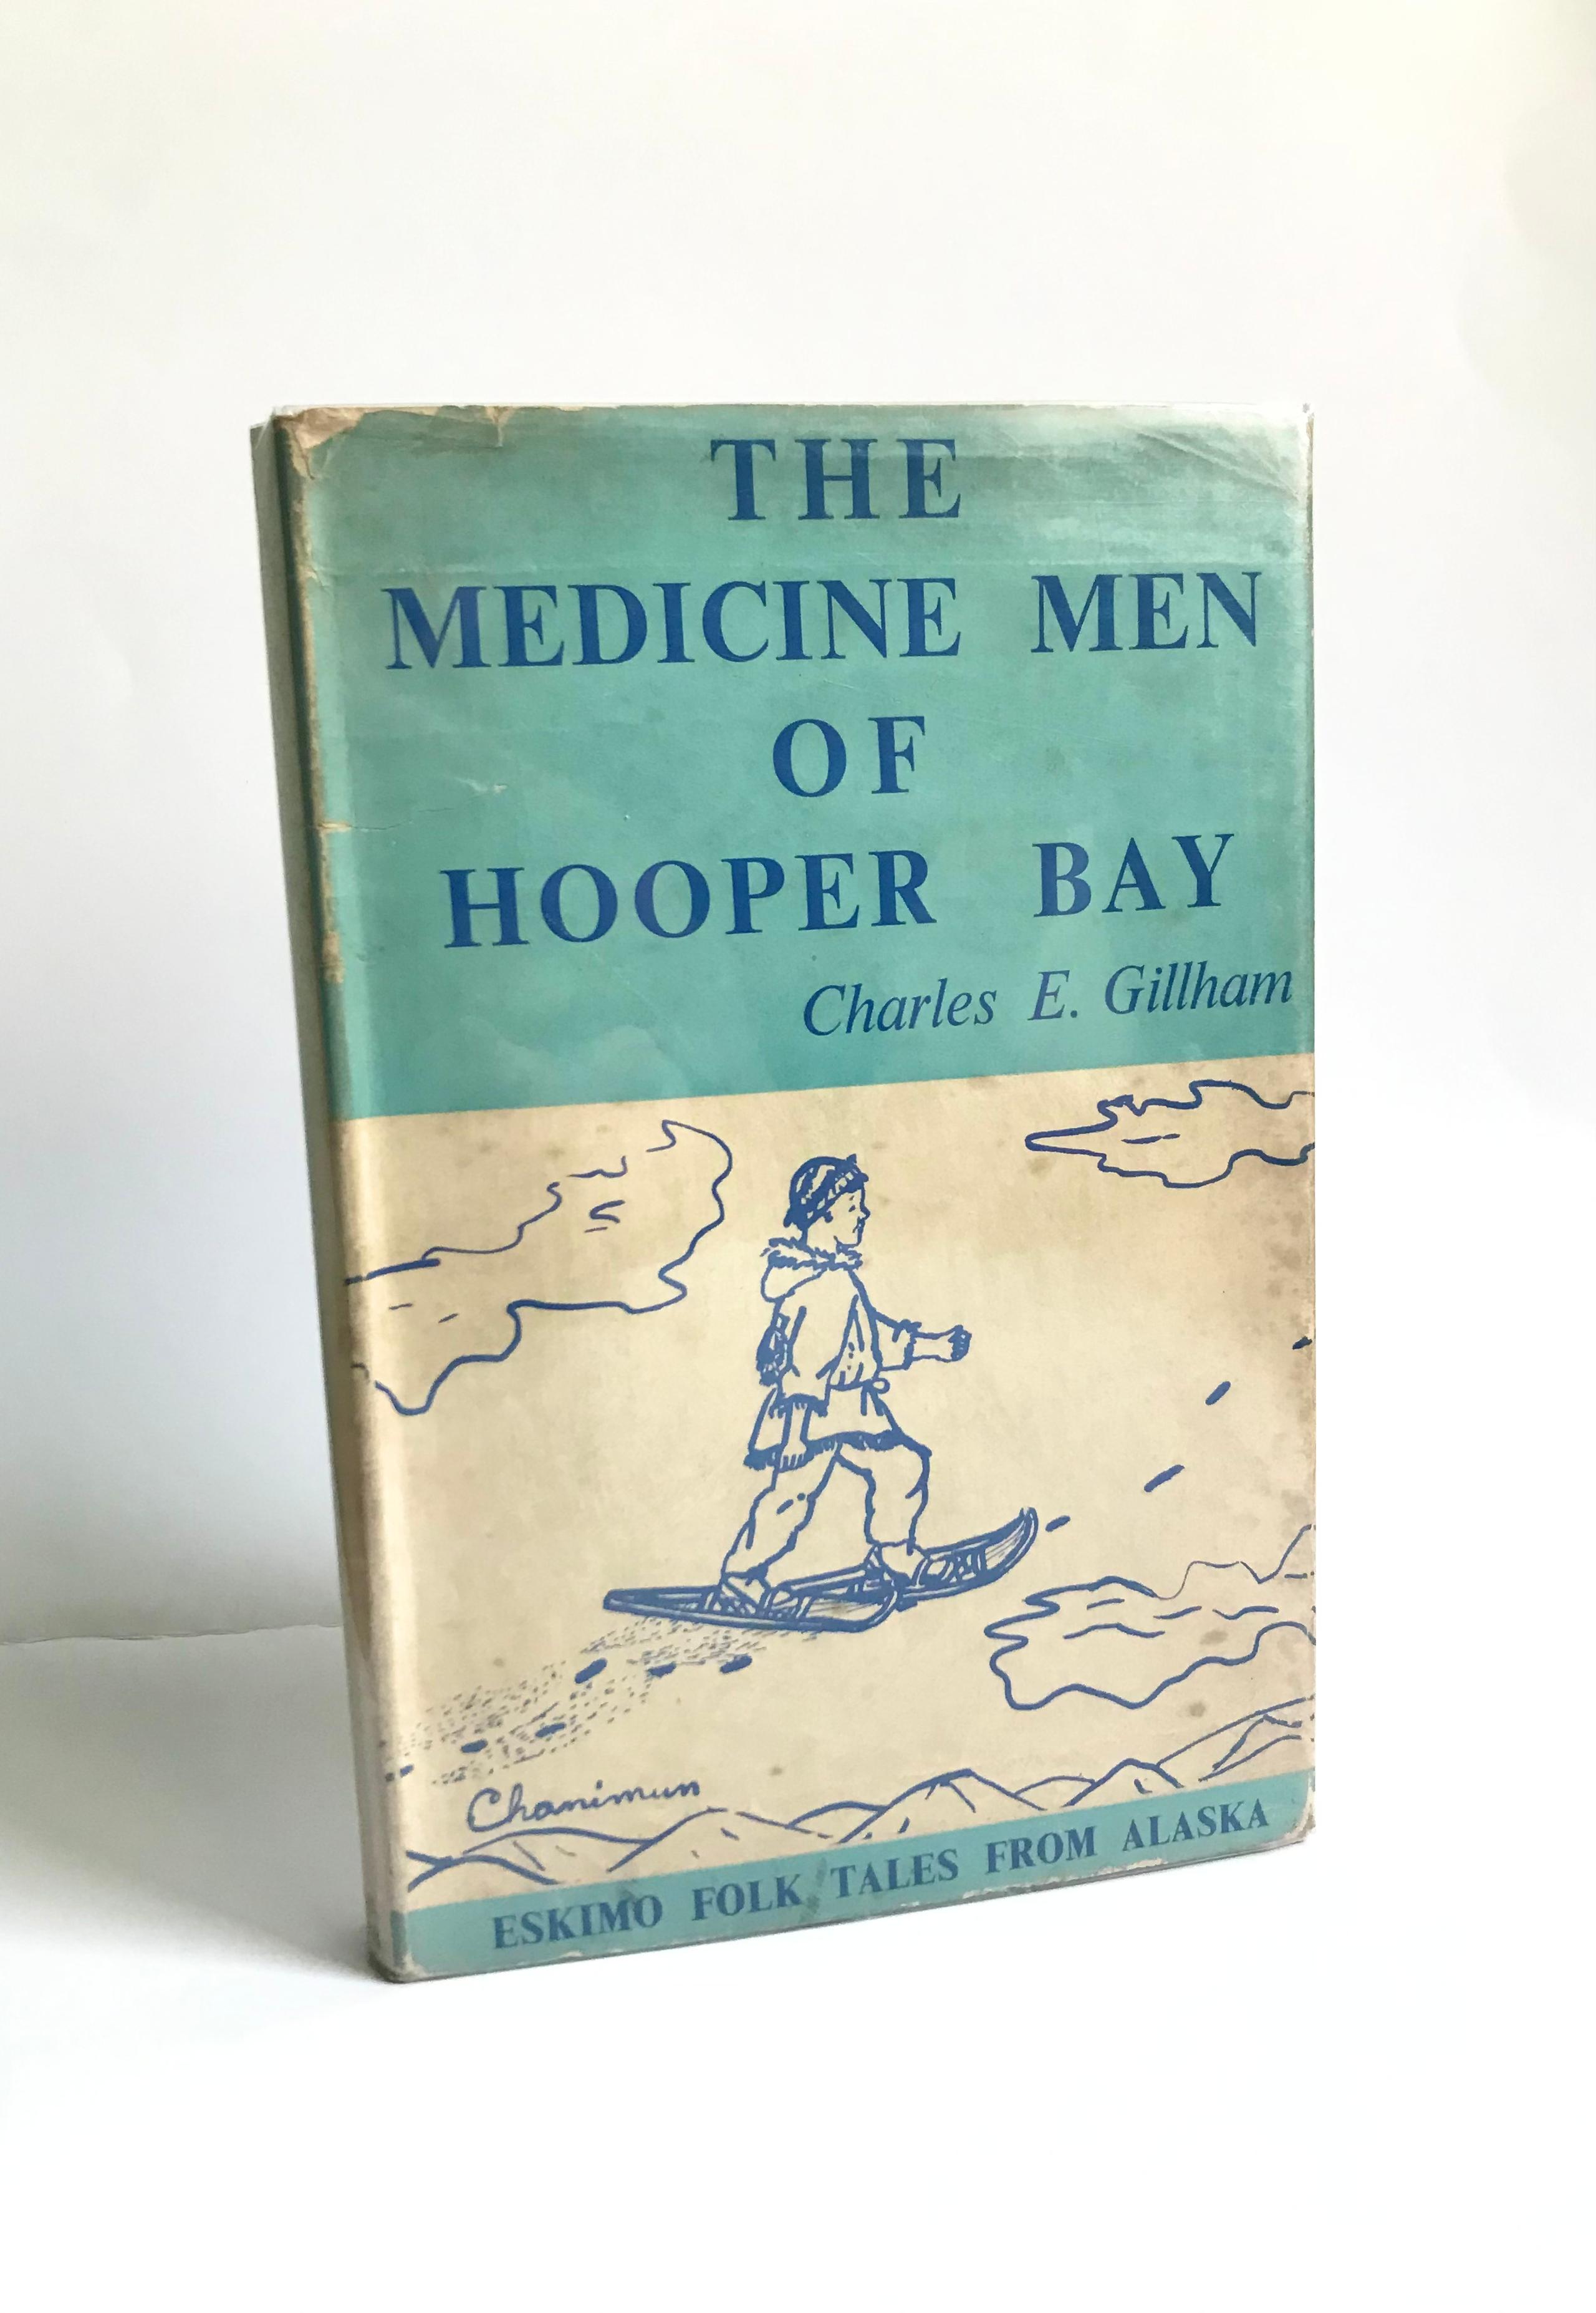 The Medicine Men of Hooper Bay by Charles E. Gillham